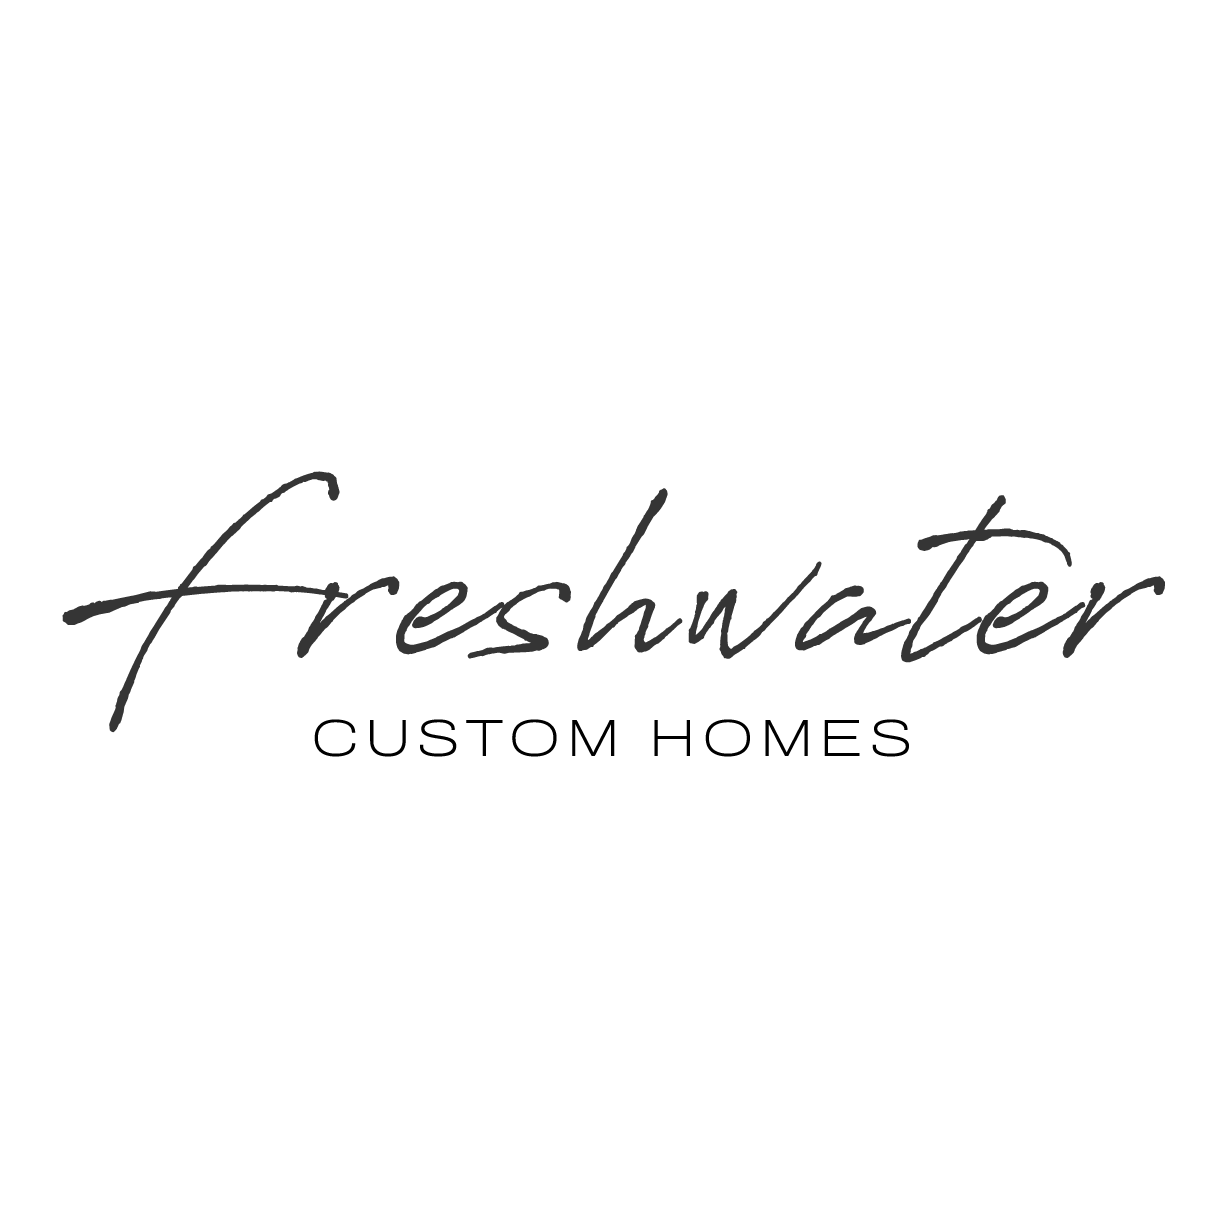 Freshwater Custom Homes - Mooresville, NC 28117 - (704)677-7110 | ShowMeLocal.com